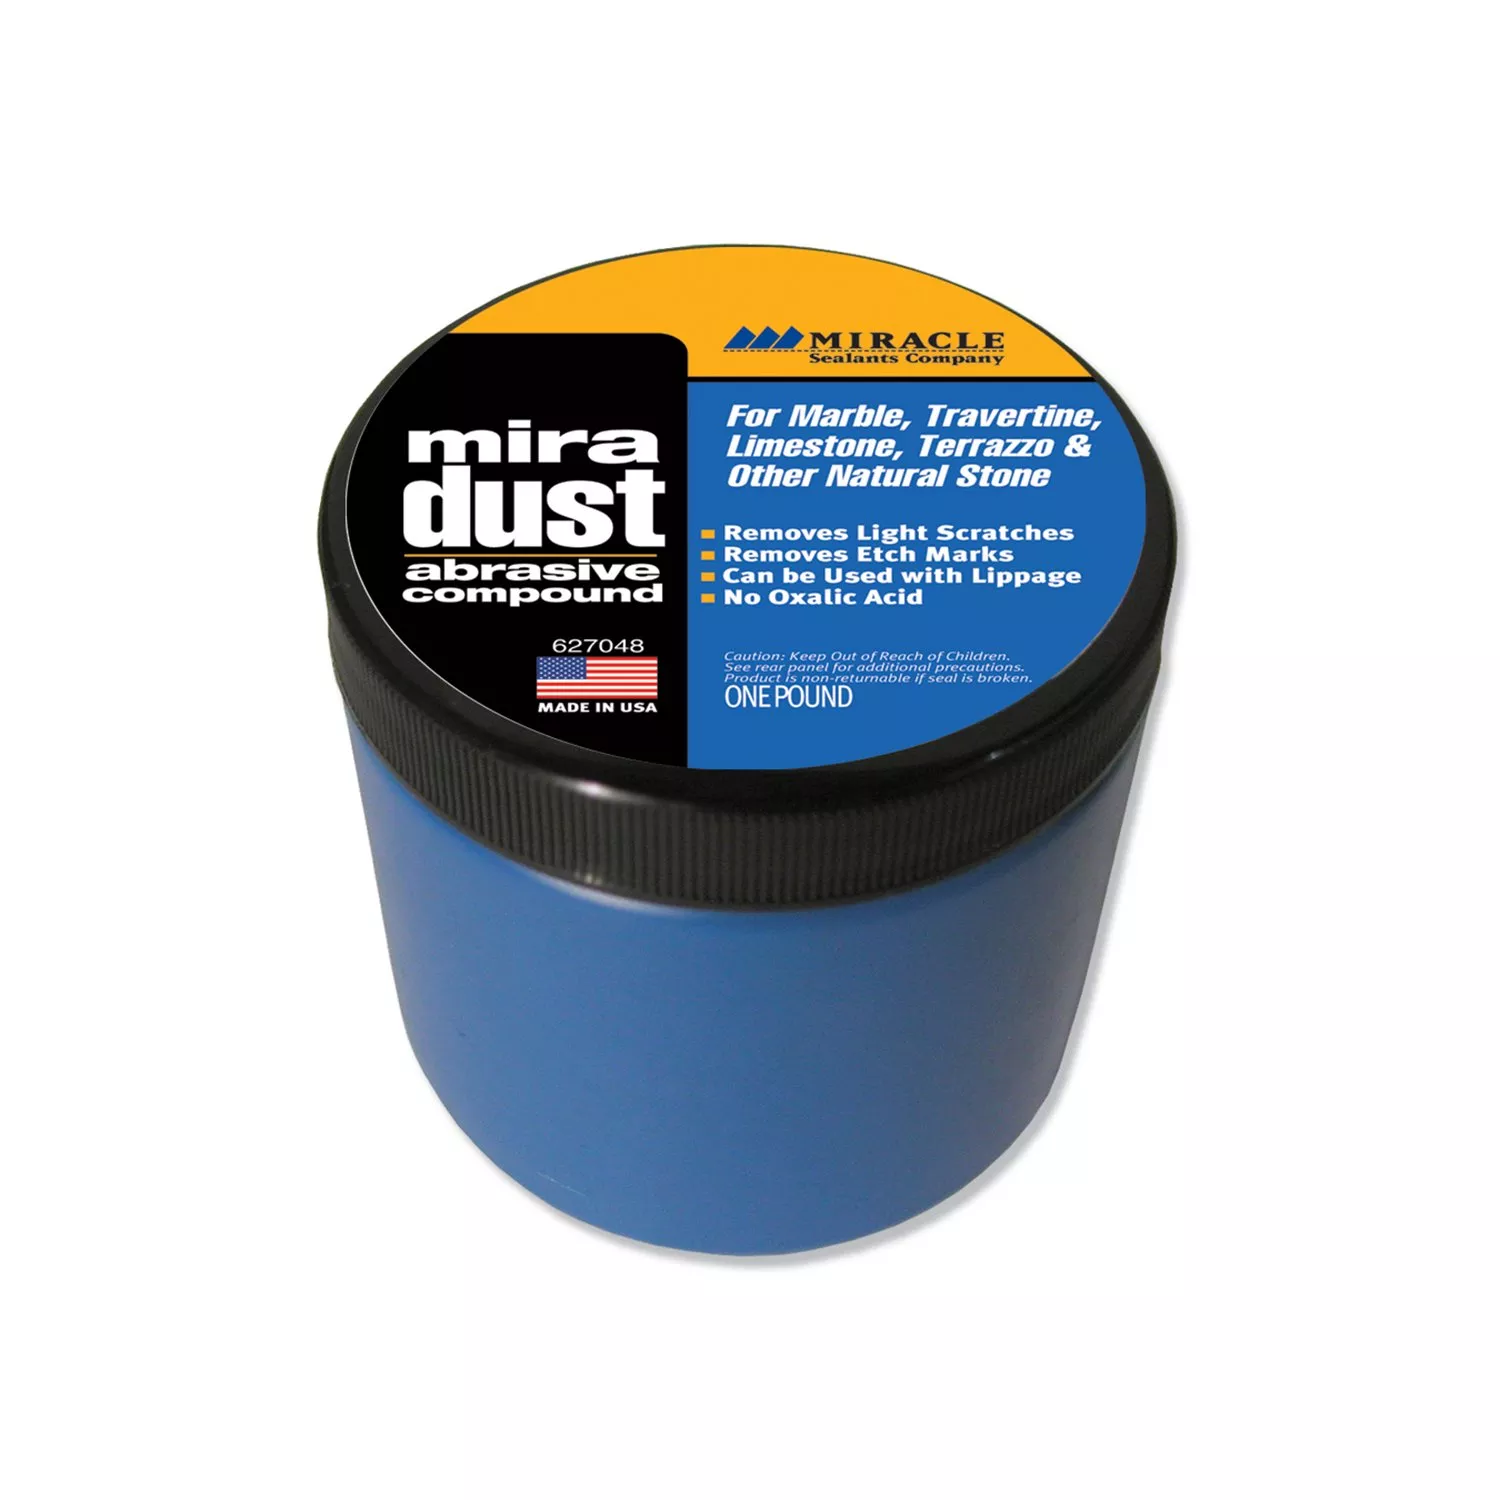 Miracle Mira Dust Abrasive Compound